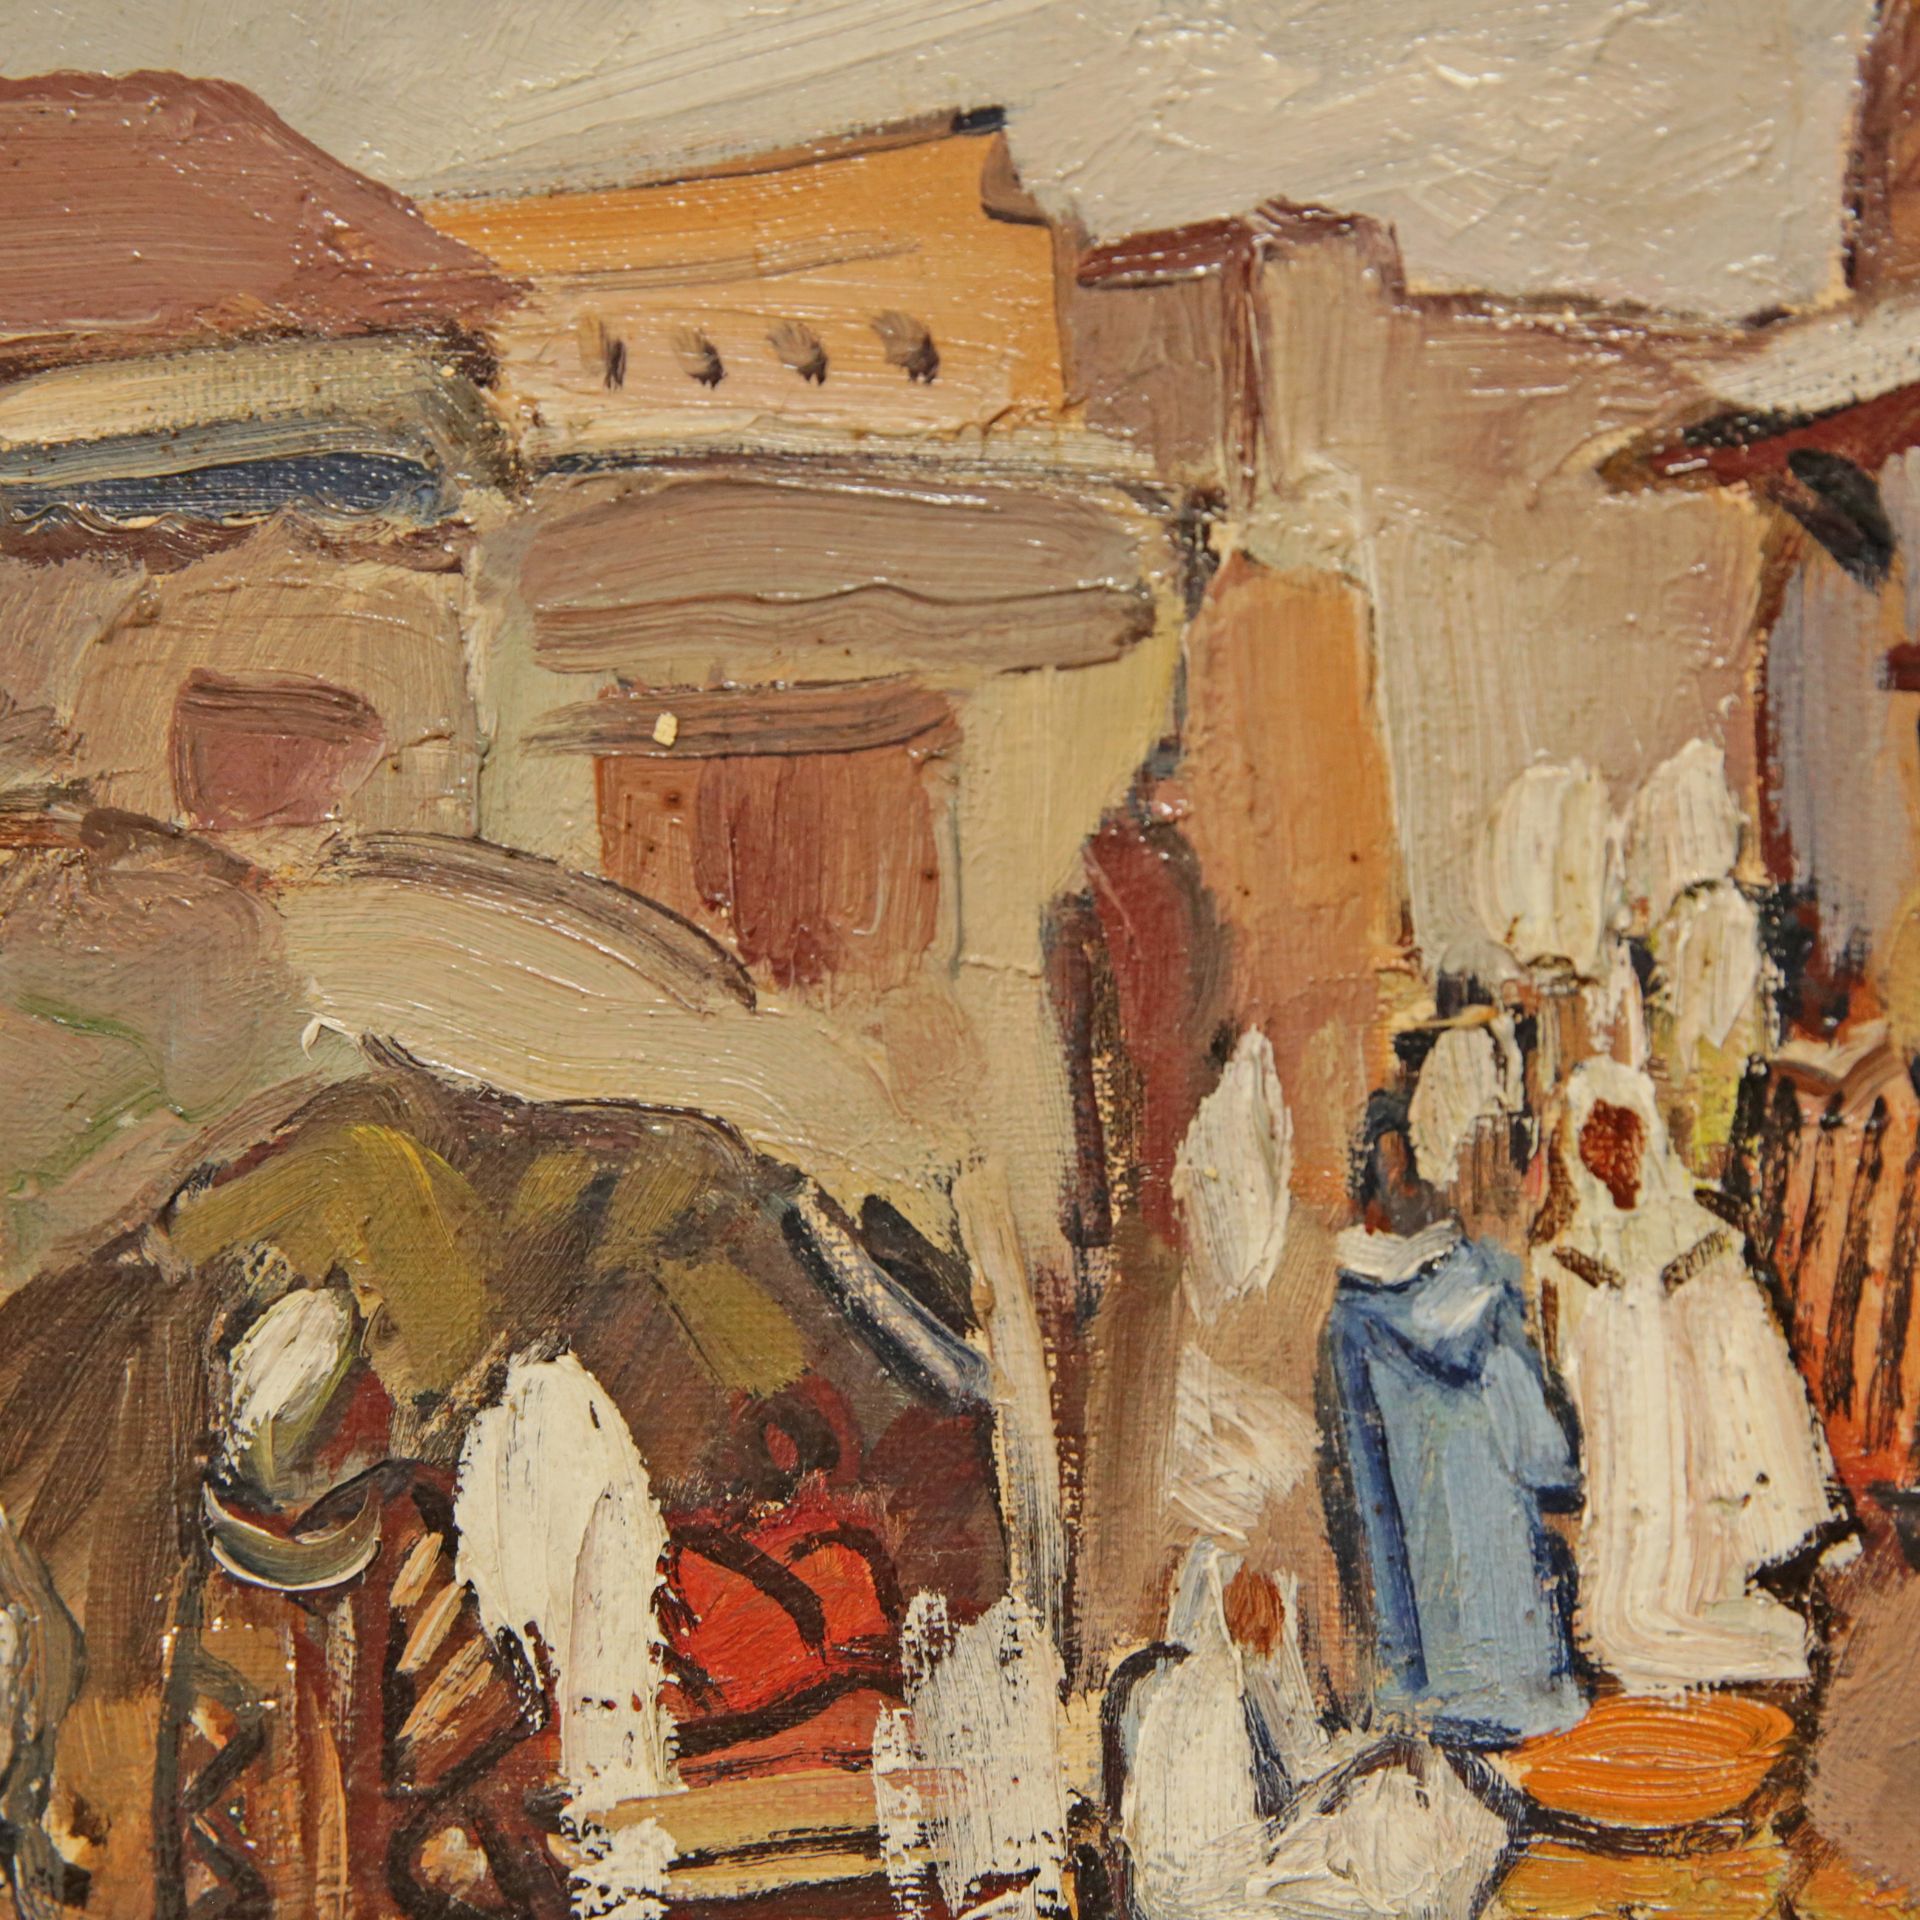 "Bazaar in Algeria", oil on canvas, Signature illegible, French painting of the 20th century. - Image 3 of 4